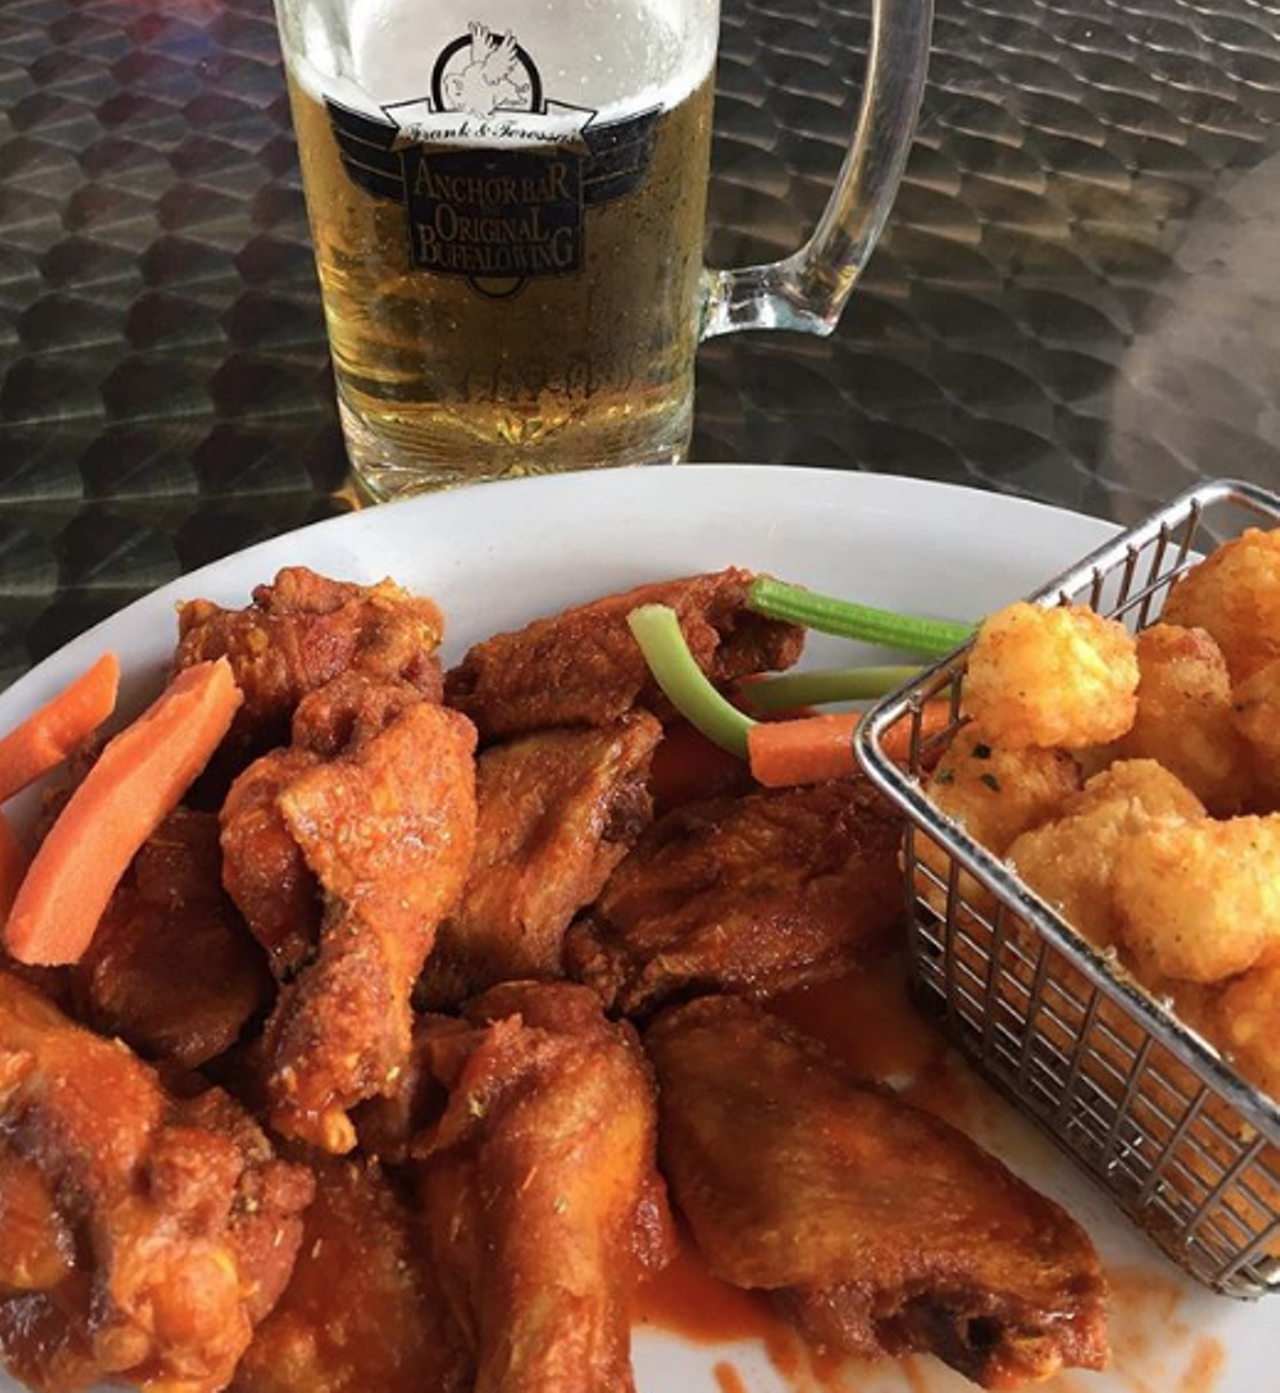 Anchor Bar
4553 N Loop 1604 W, (210) 492-9464, anchorbar.com
There are plenty of imitations, but none come close to Anchor Bar, home of the original Buffalo wing. You’ll find plenty of flavor options, but the classic exists for a reason.
Photo via Instagram / jwh181